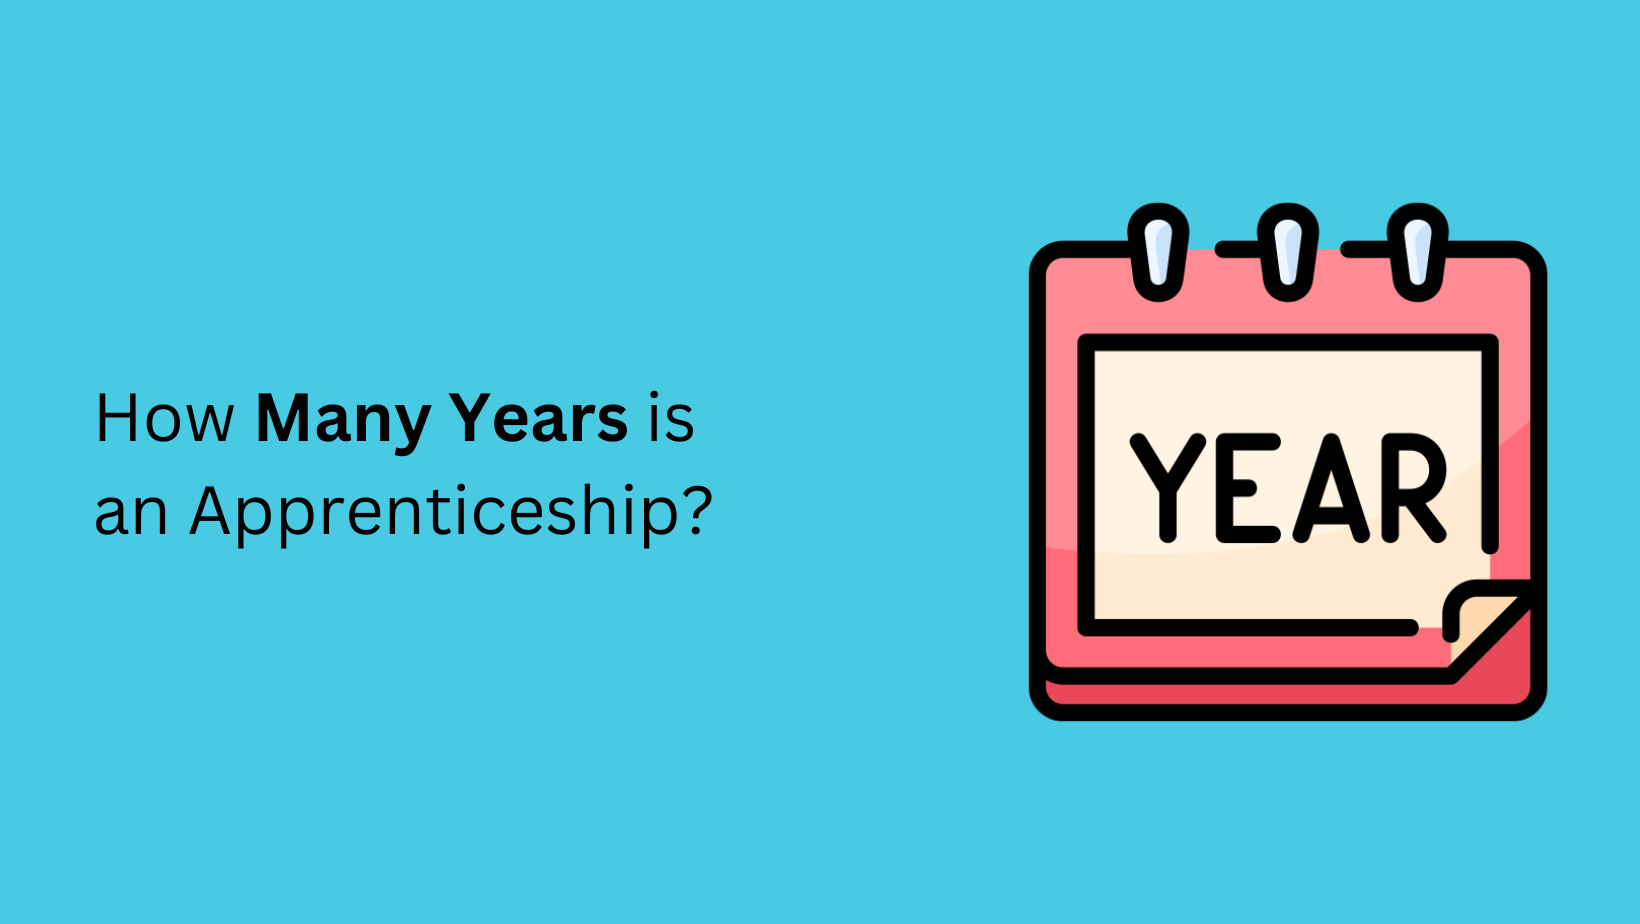 How Many Years is an Apprenticeship